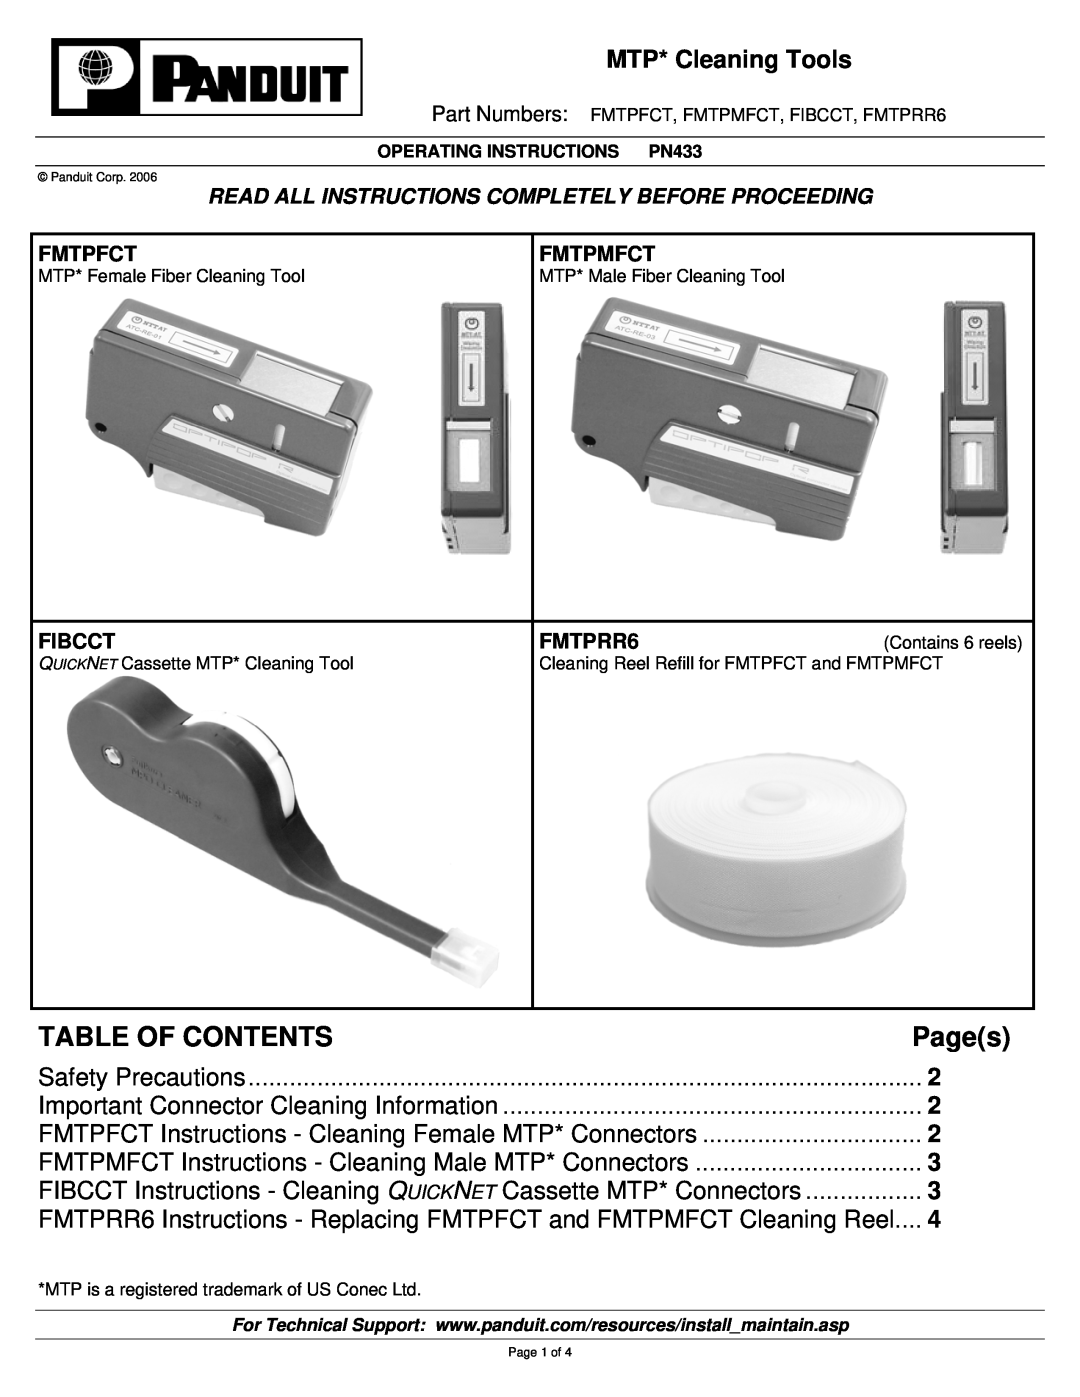 Panduit PN433 manual Table Of Contents, Pages, MTP* Cleaning Tools 